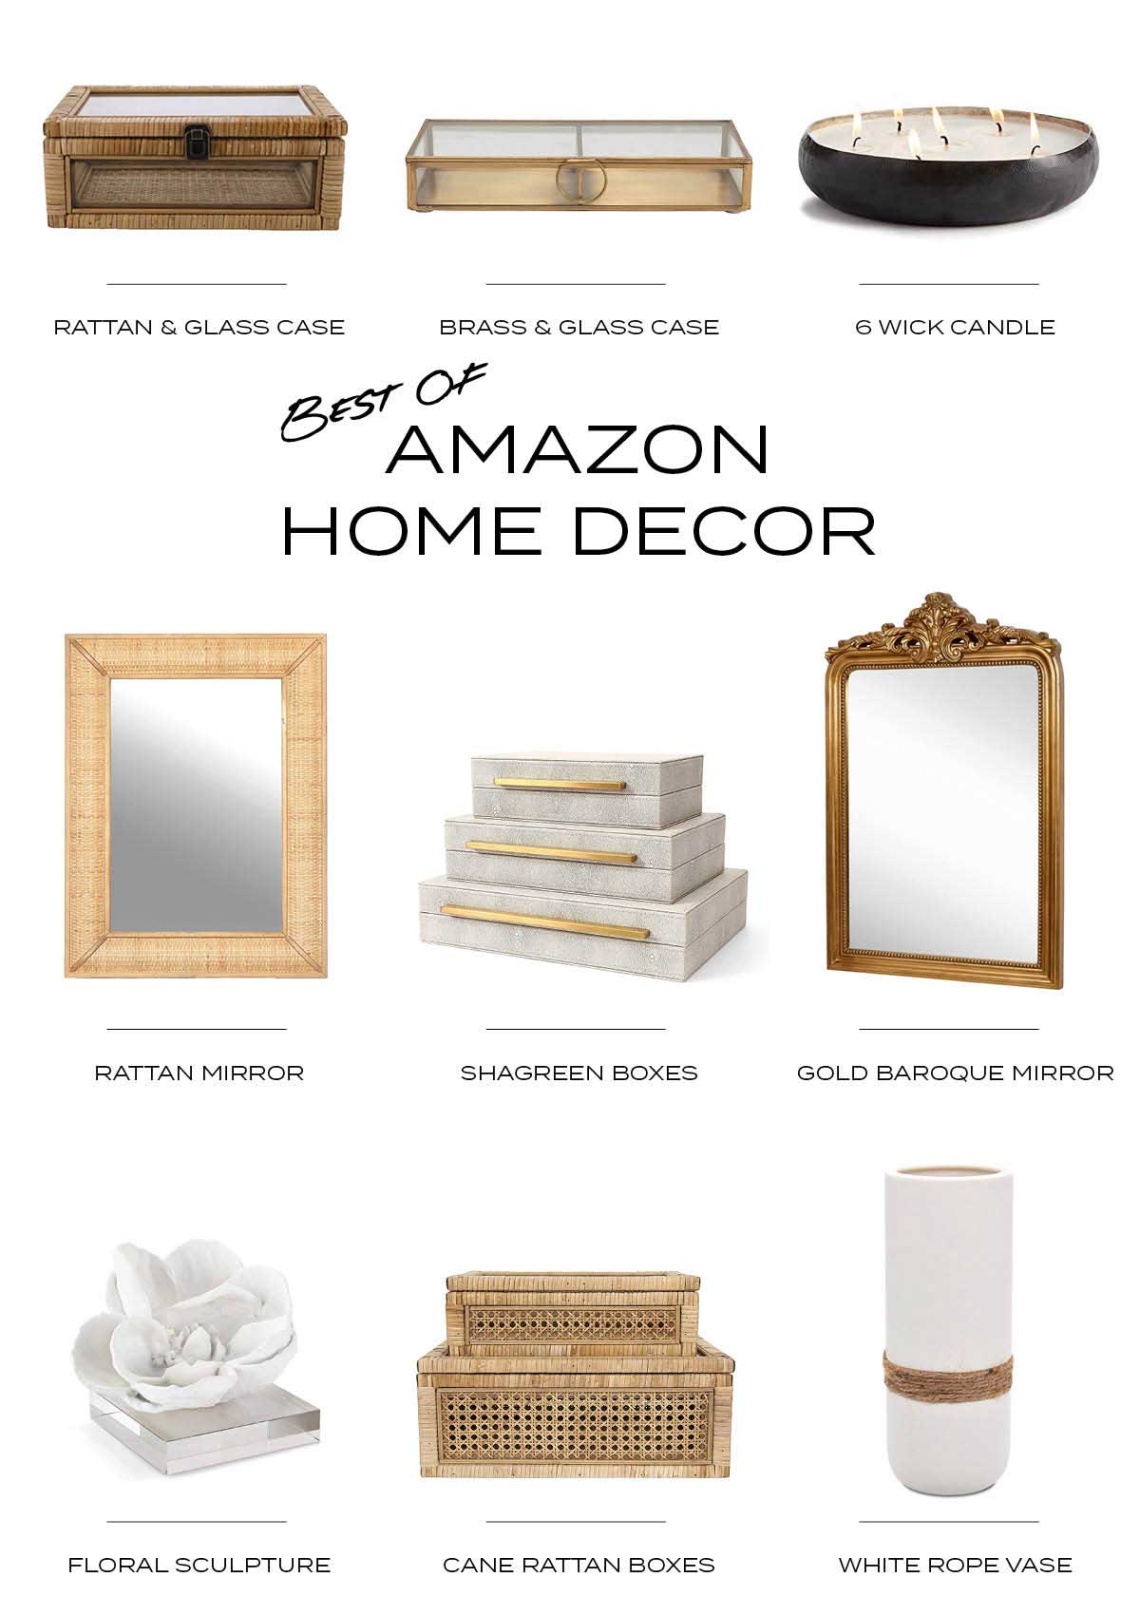 amazon home decor influencers Bulan 2 Best Of Amazon Home Decor - House Of Hipsters - Round Up